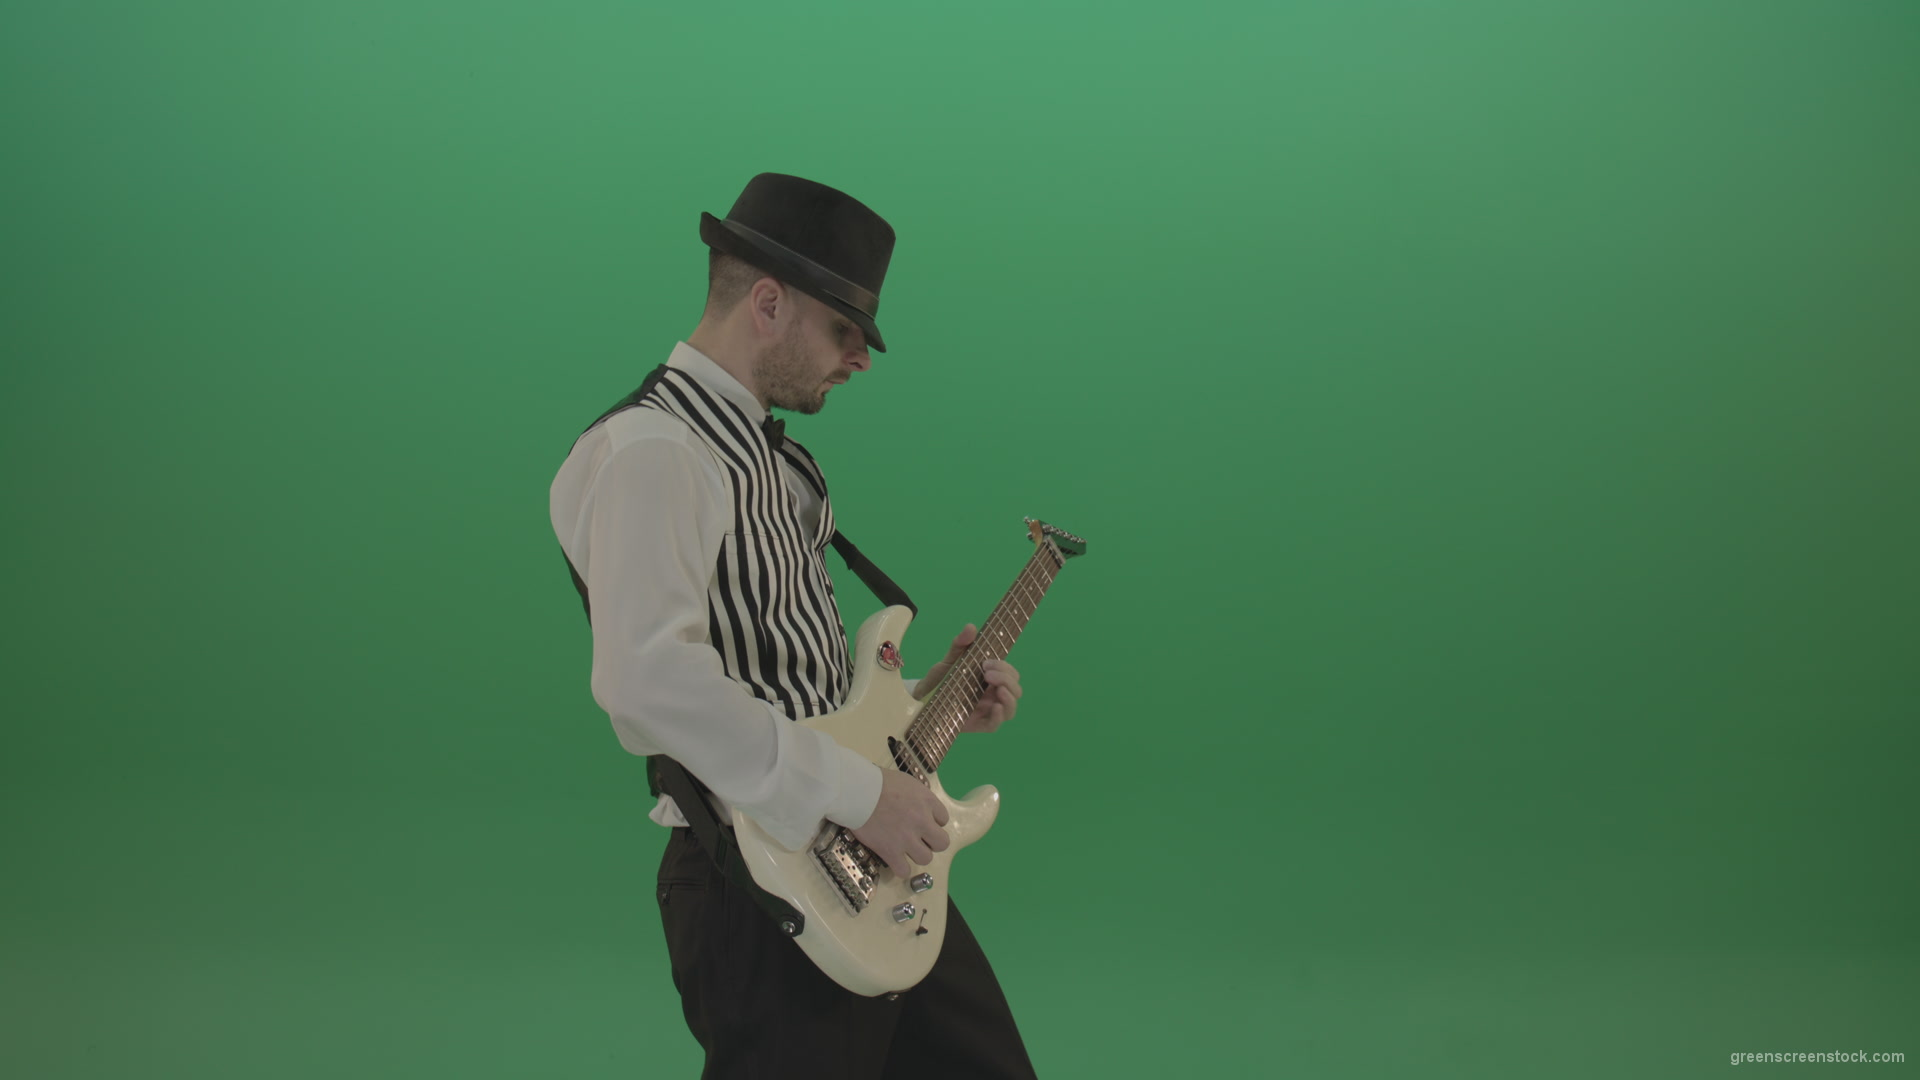 Classic-jazz-guitarist-play-white-electro-guitar-solo-music-on-green-screen_004 Green Screen Stock